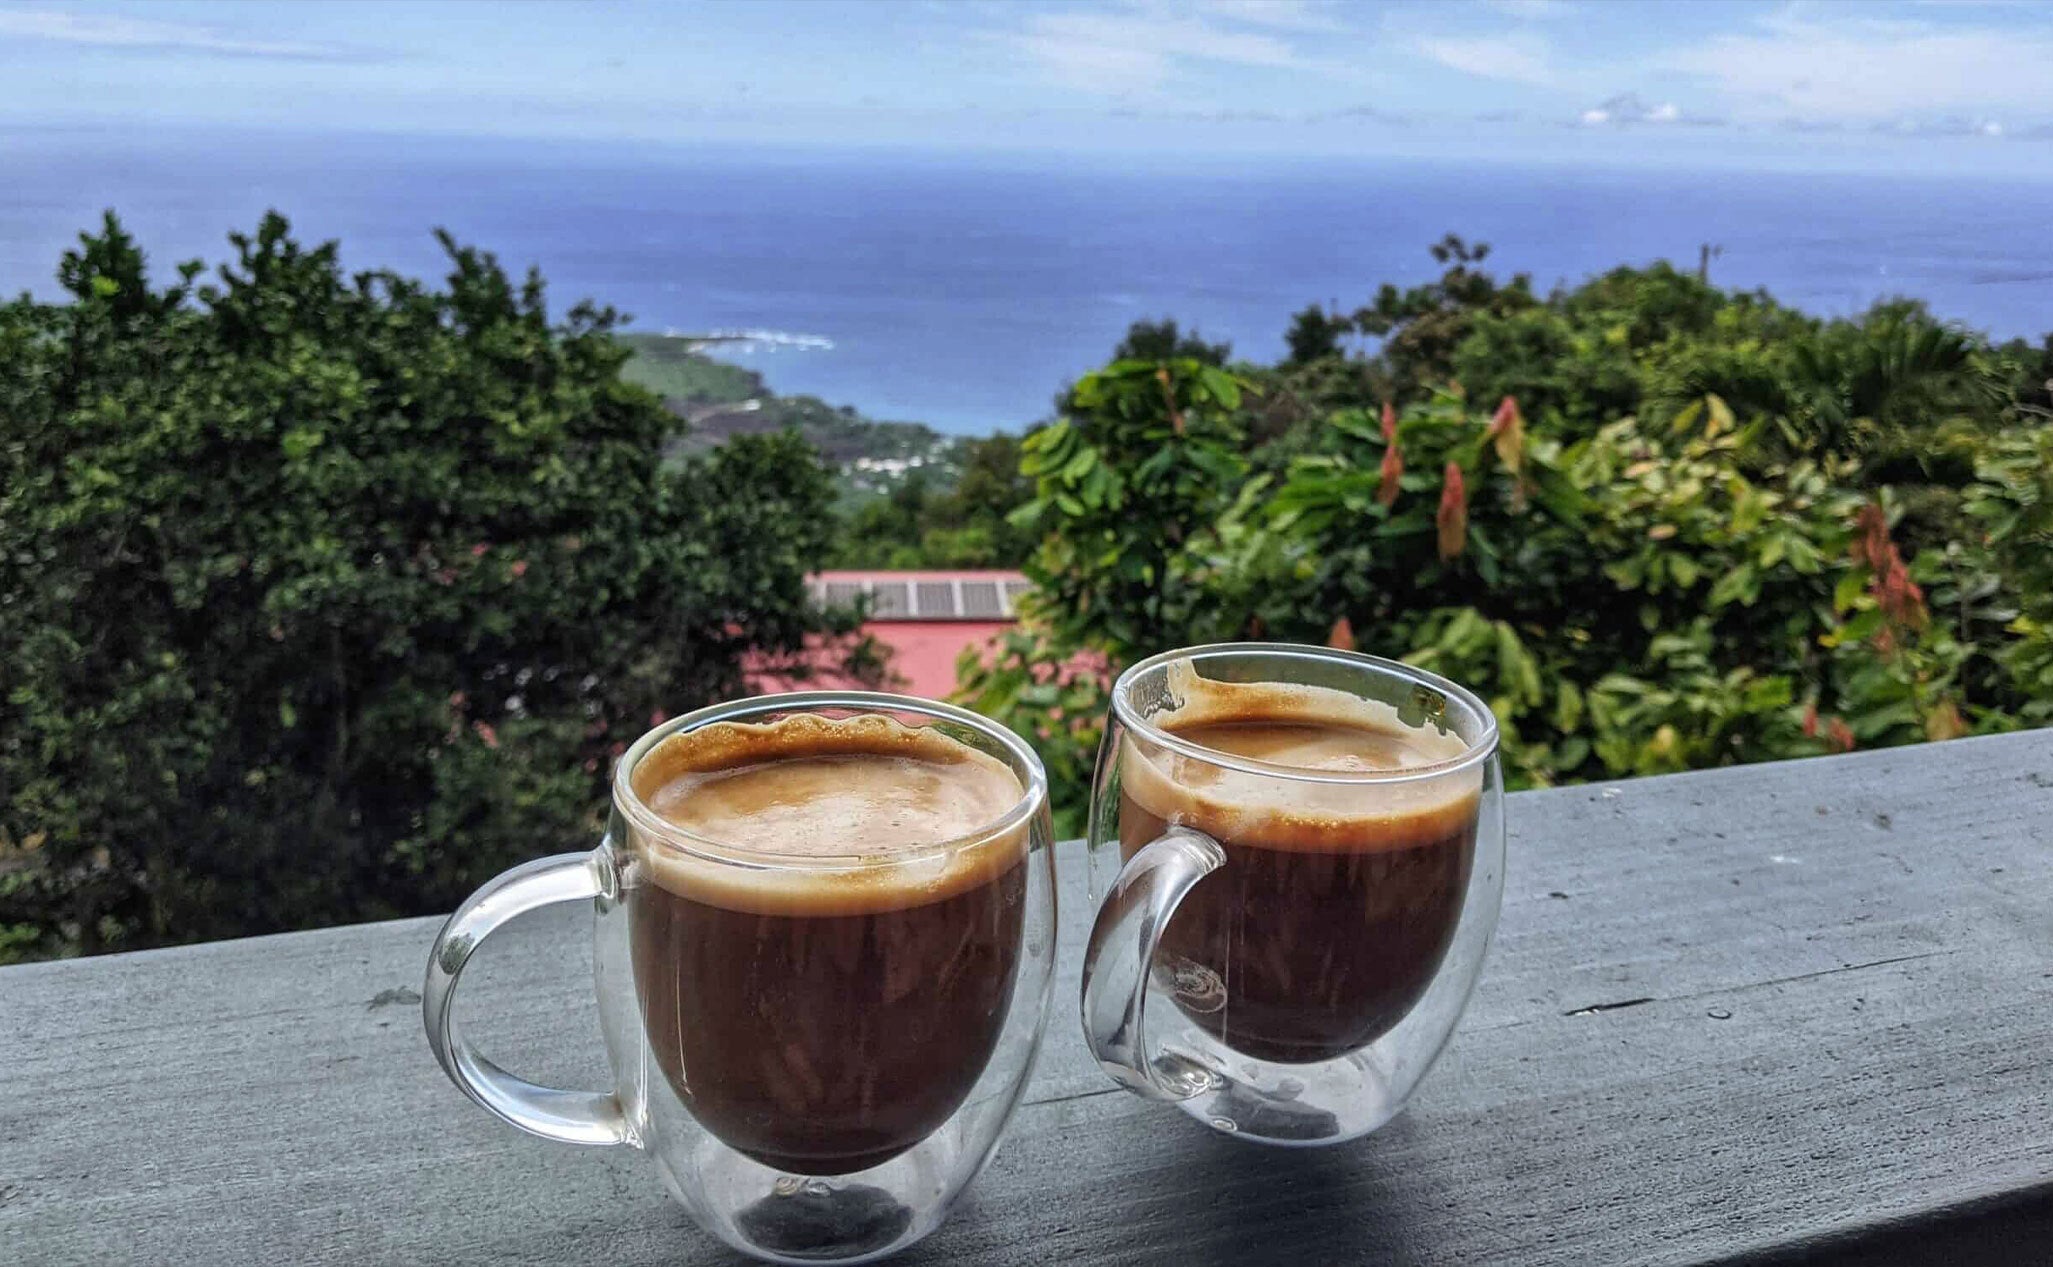 Two cups of espresso on a balcony ledge with a view of the sea